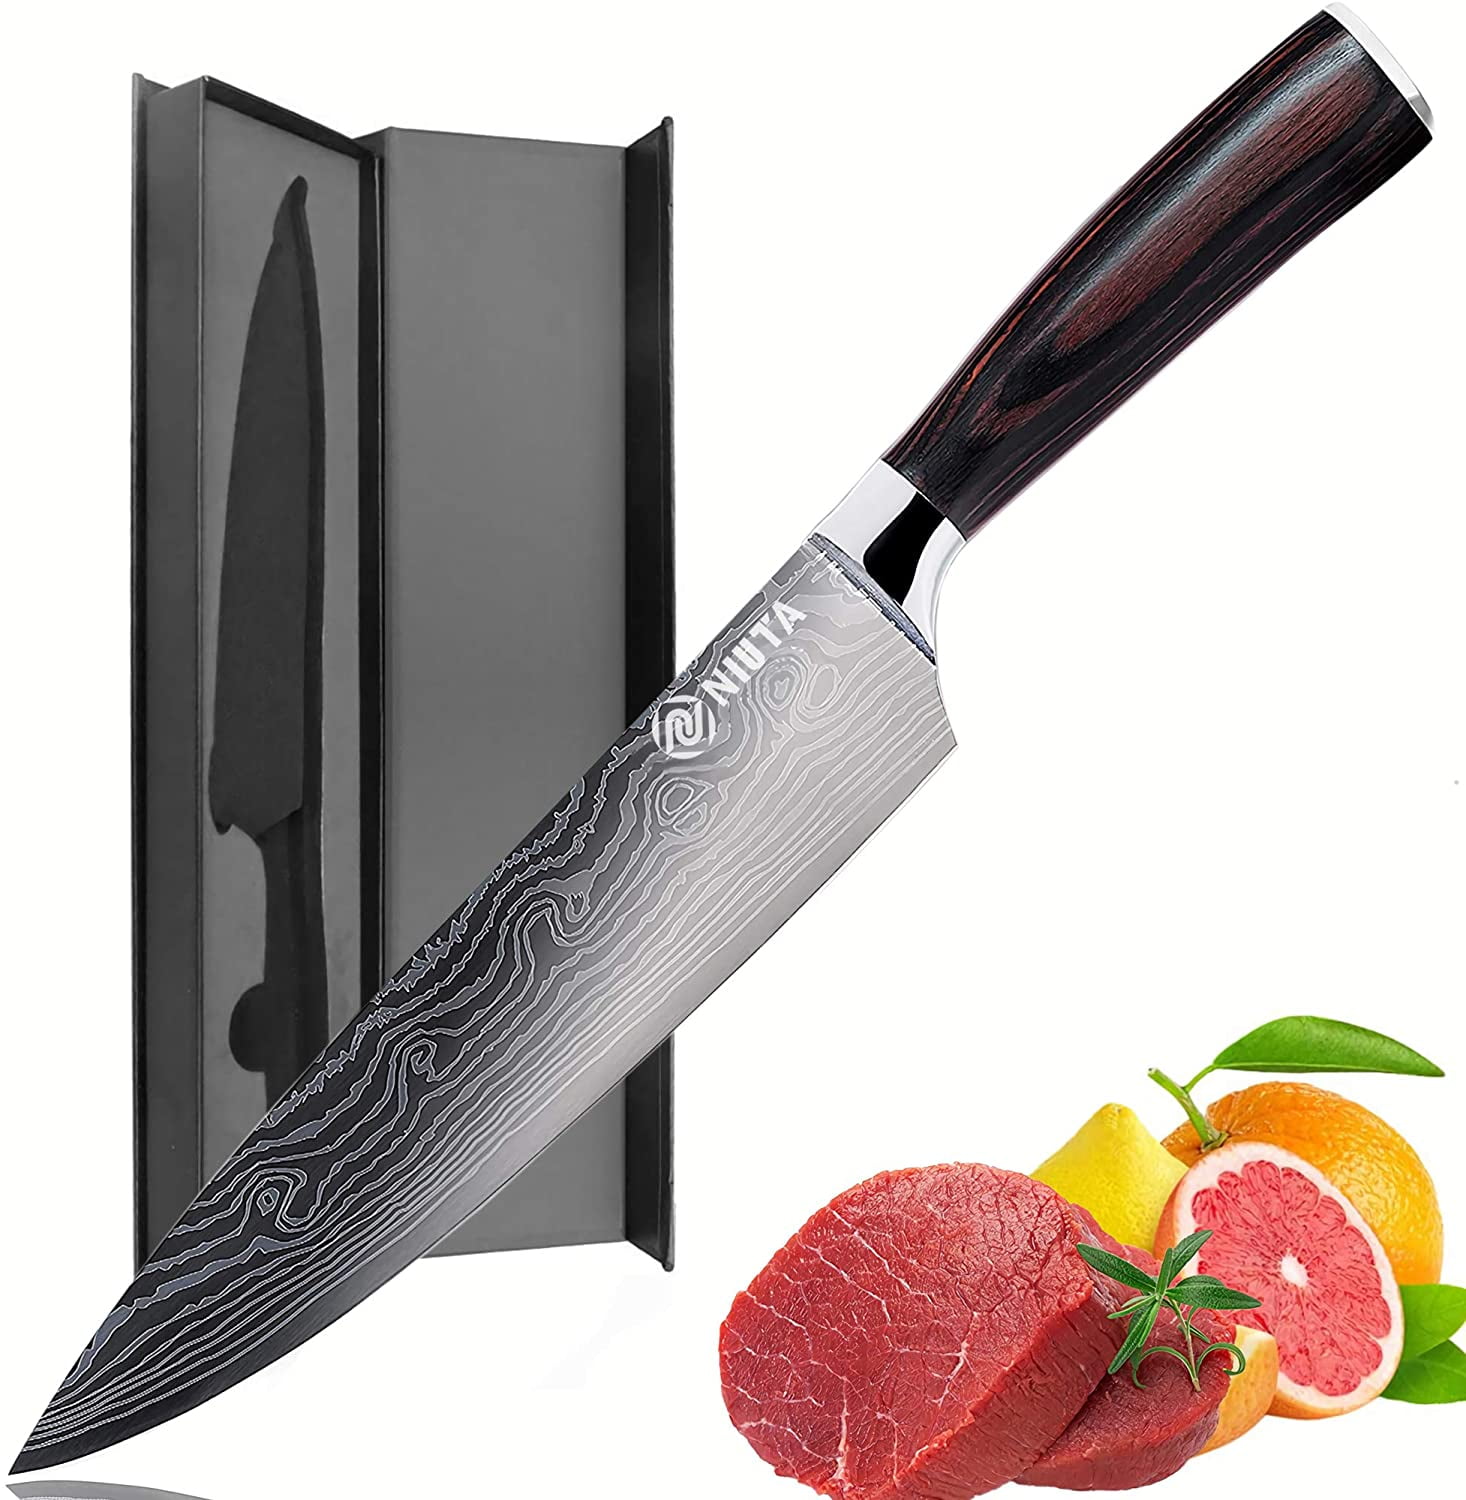 ALLWIN-HOUSEWARE W Beauty German High Carbon Stainless Steel Chef Knife  with Laser Pattern, 8 Inch Color Wood Handle Gyutou Knife, 3D Black